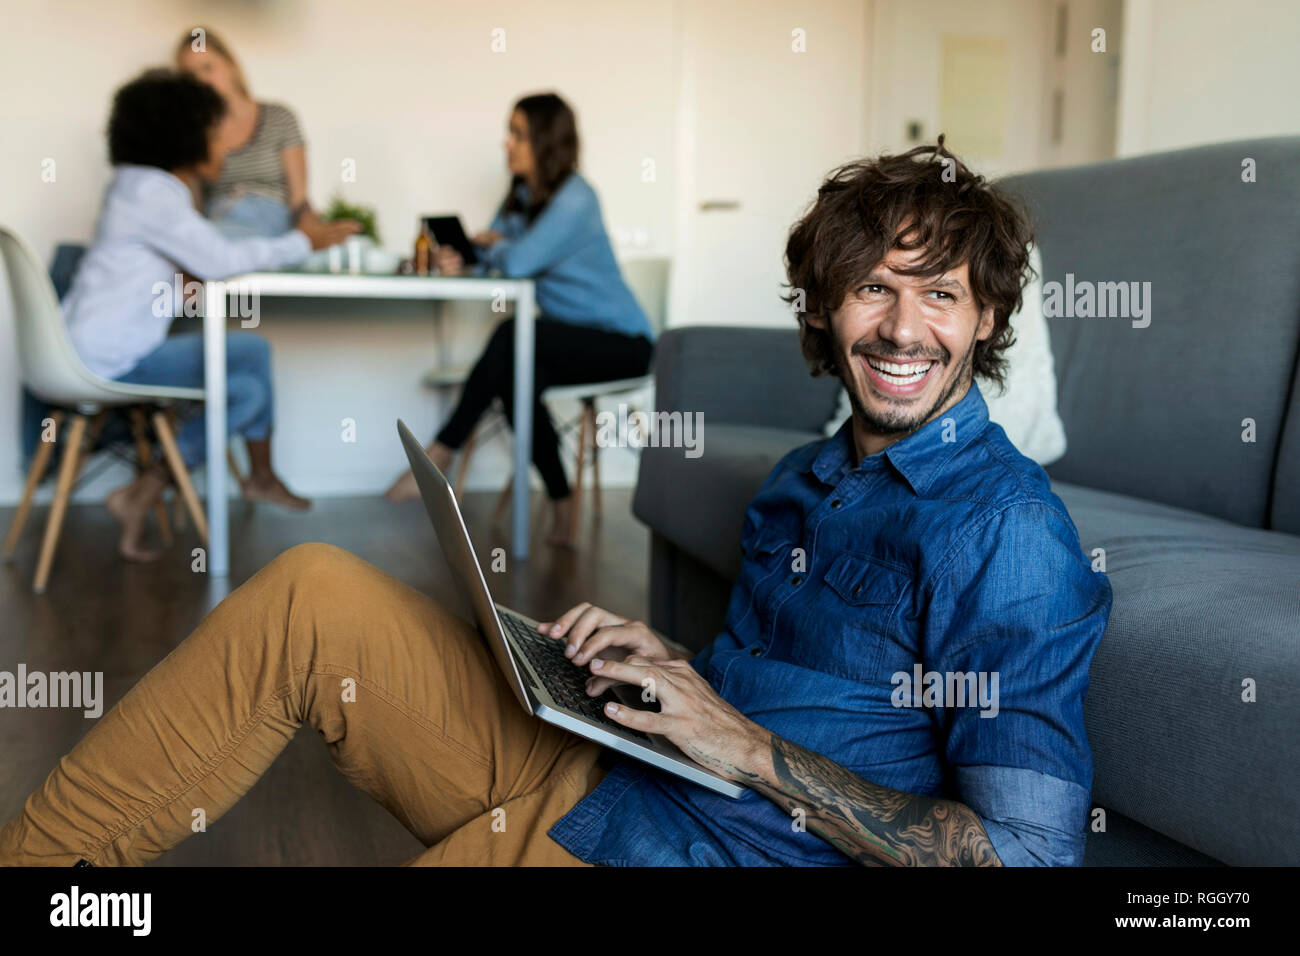 Laughing man sitting on floor using laptop with friends in background Stock Photo